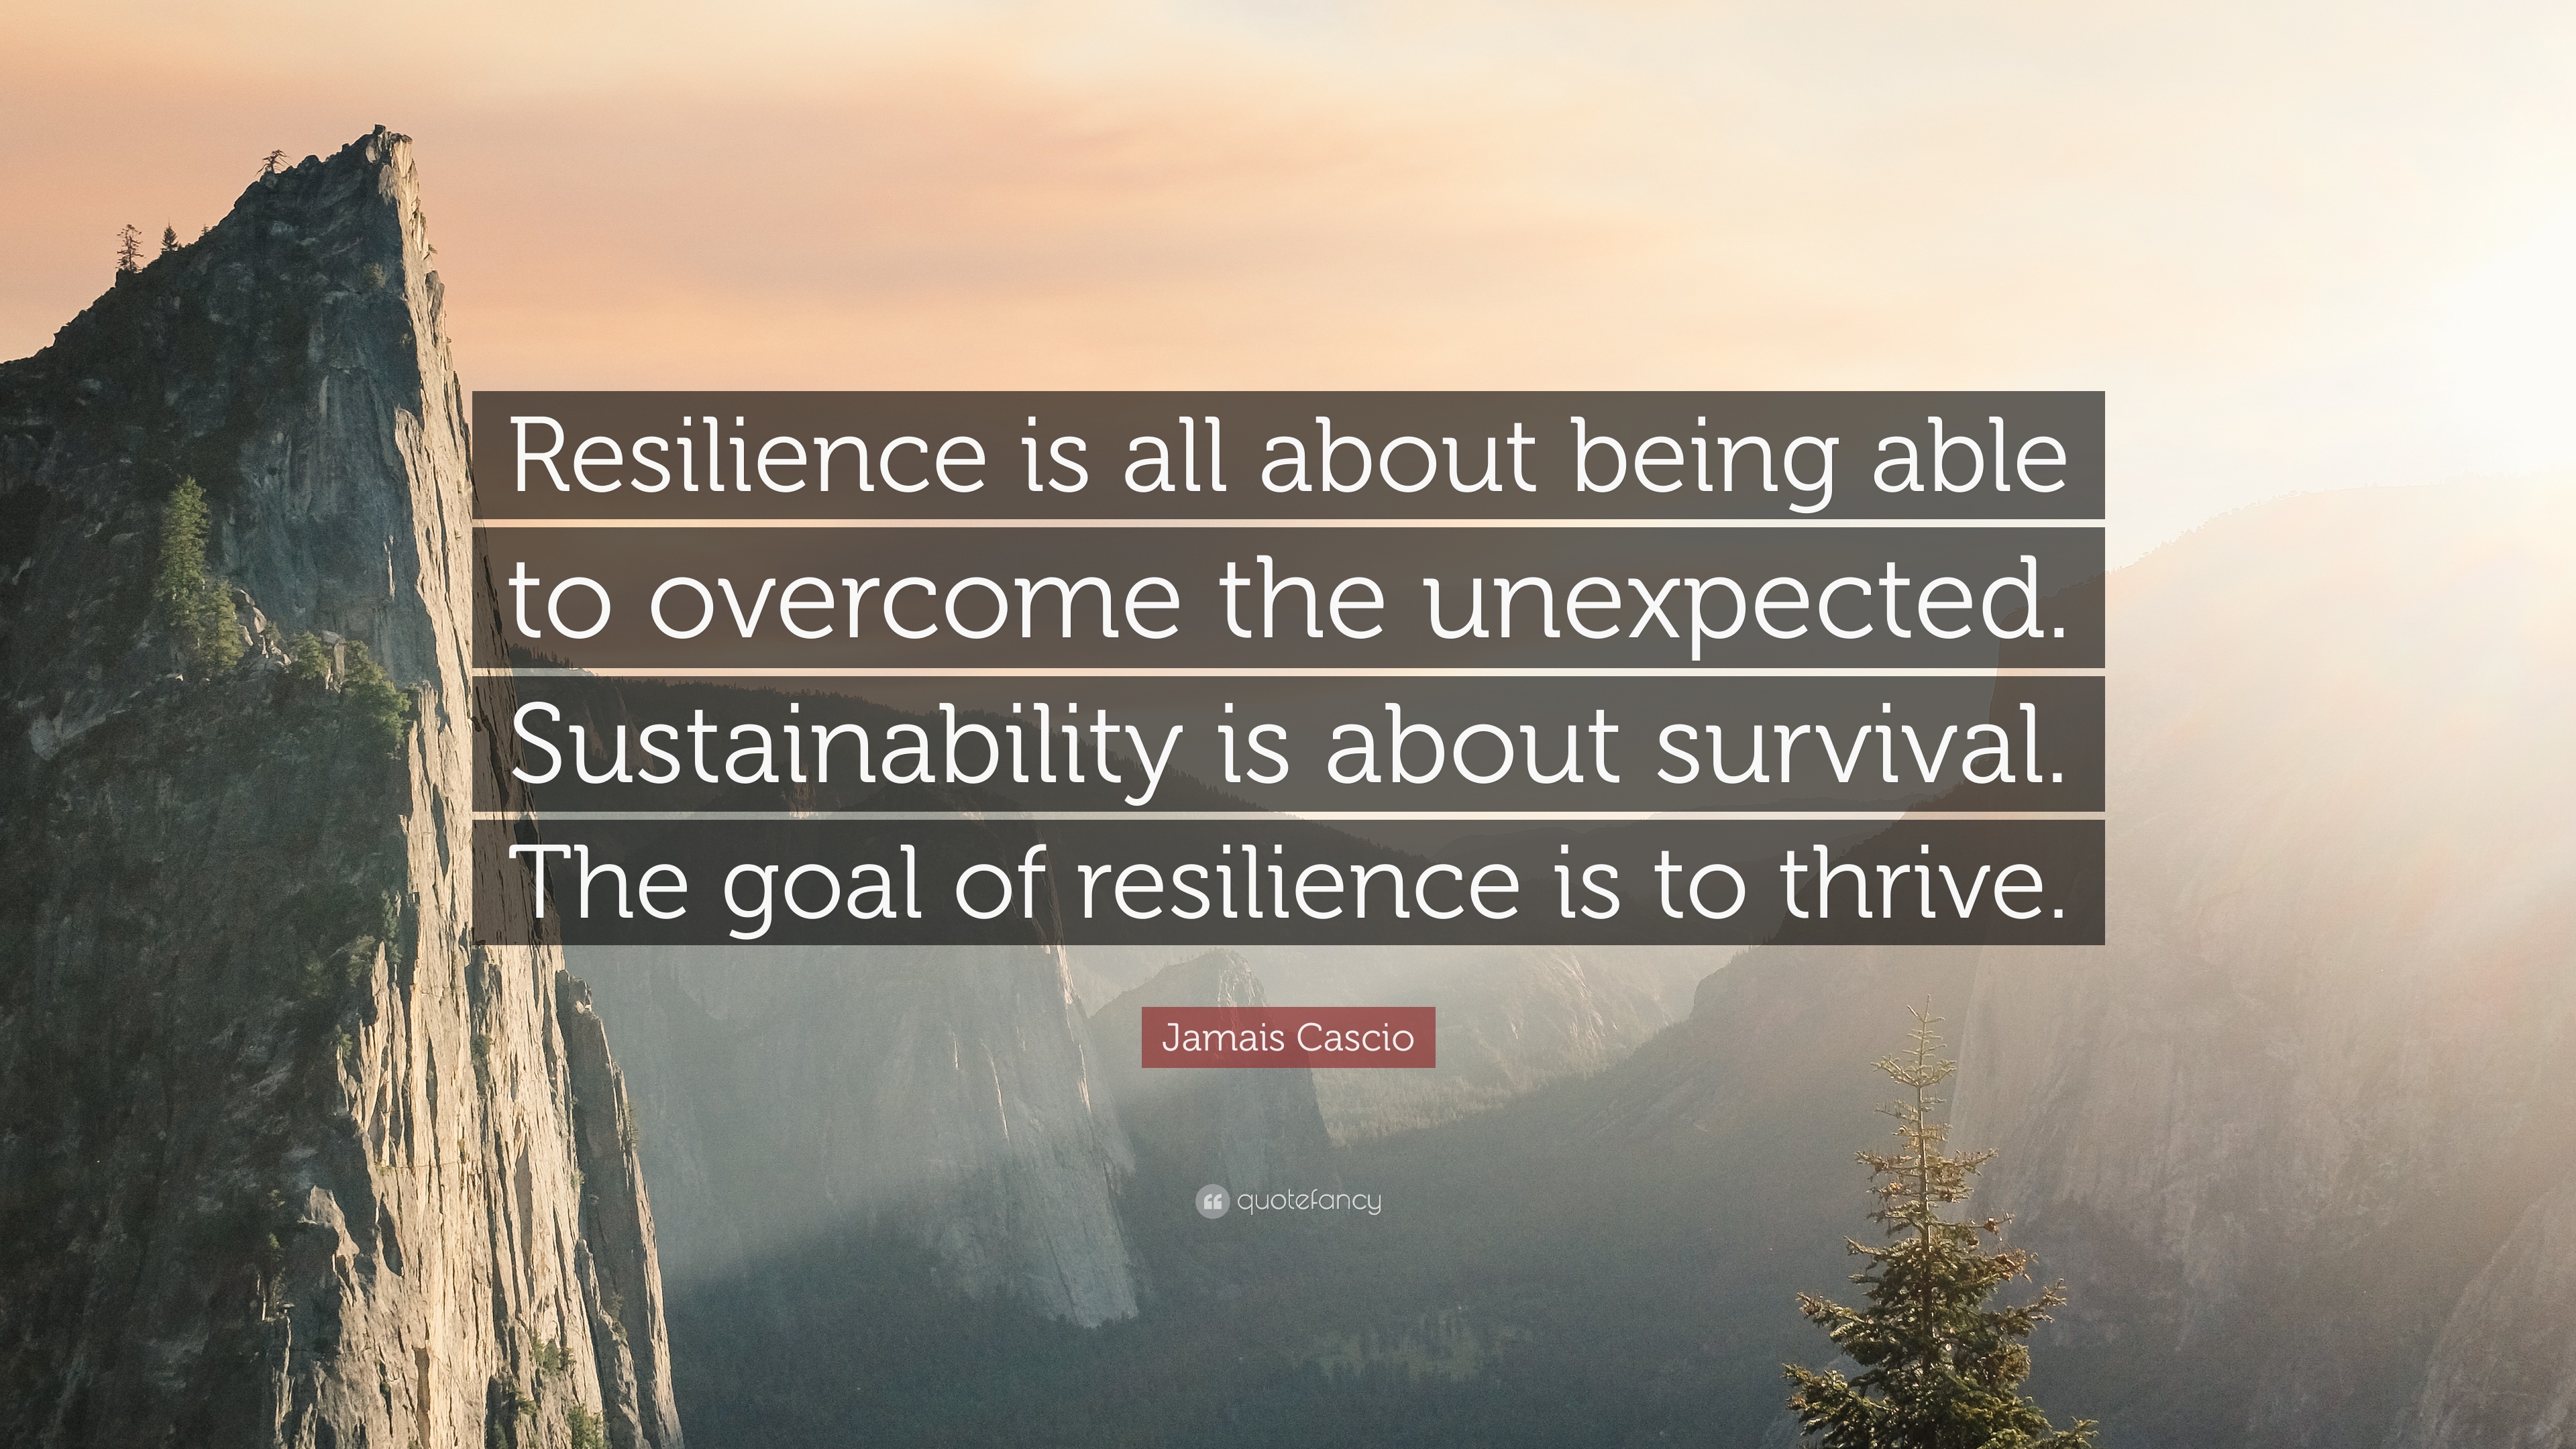 Quotes about resilience in business Yasmin mogahed quotes 132 wallpaper quotefancy